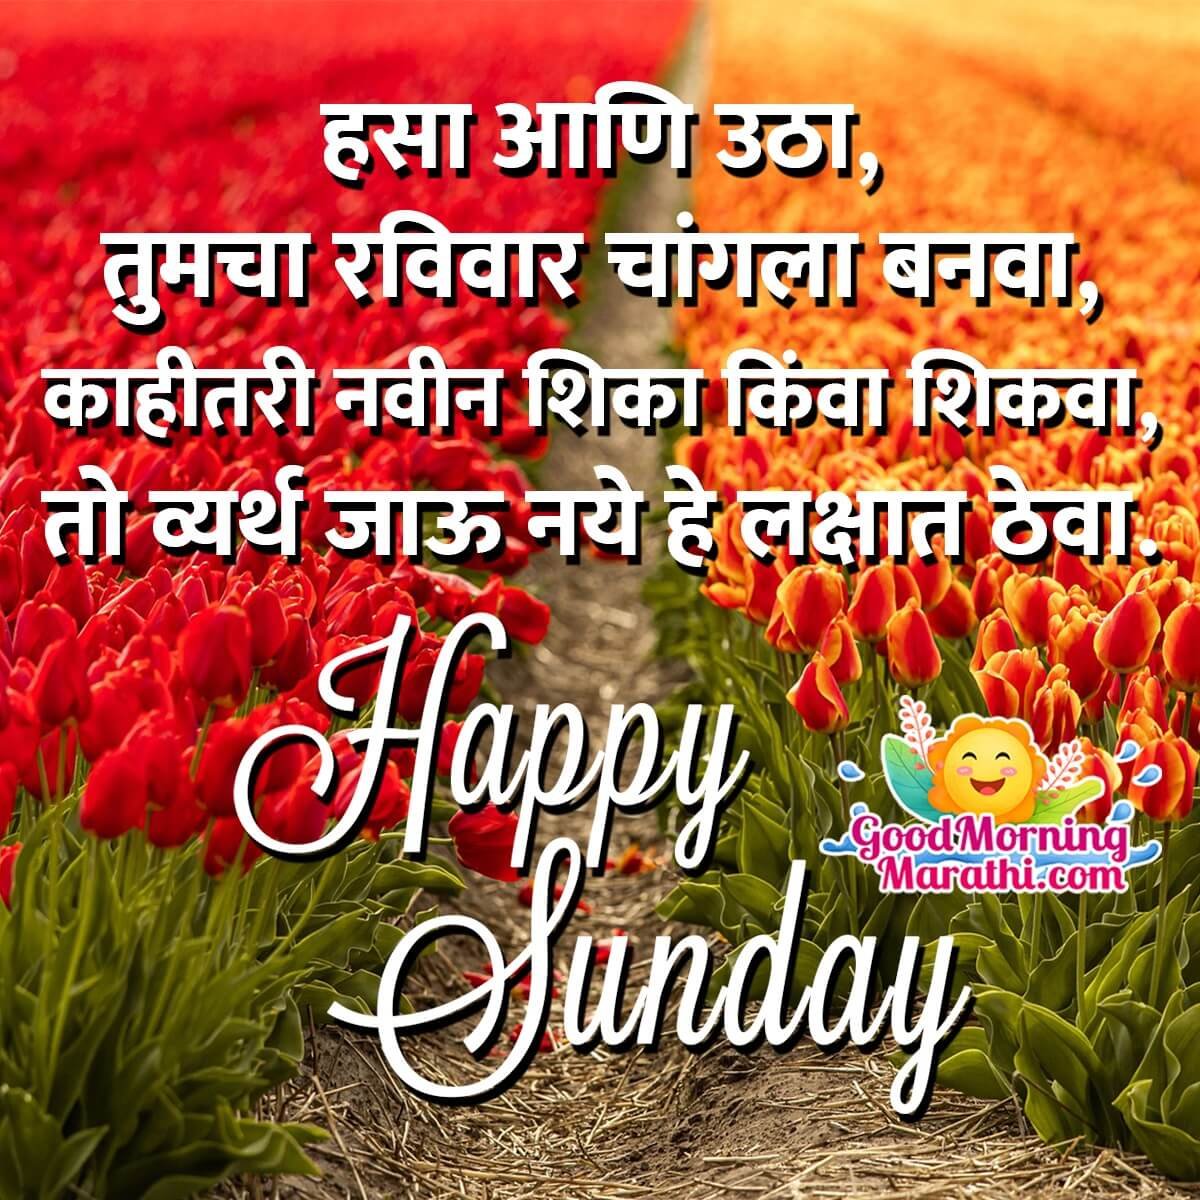 Happy Sunday Good Morning Messages - Good Morning Wishes & Images ...